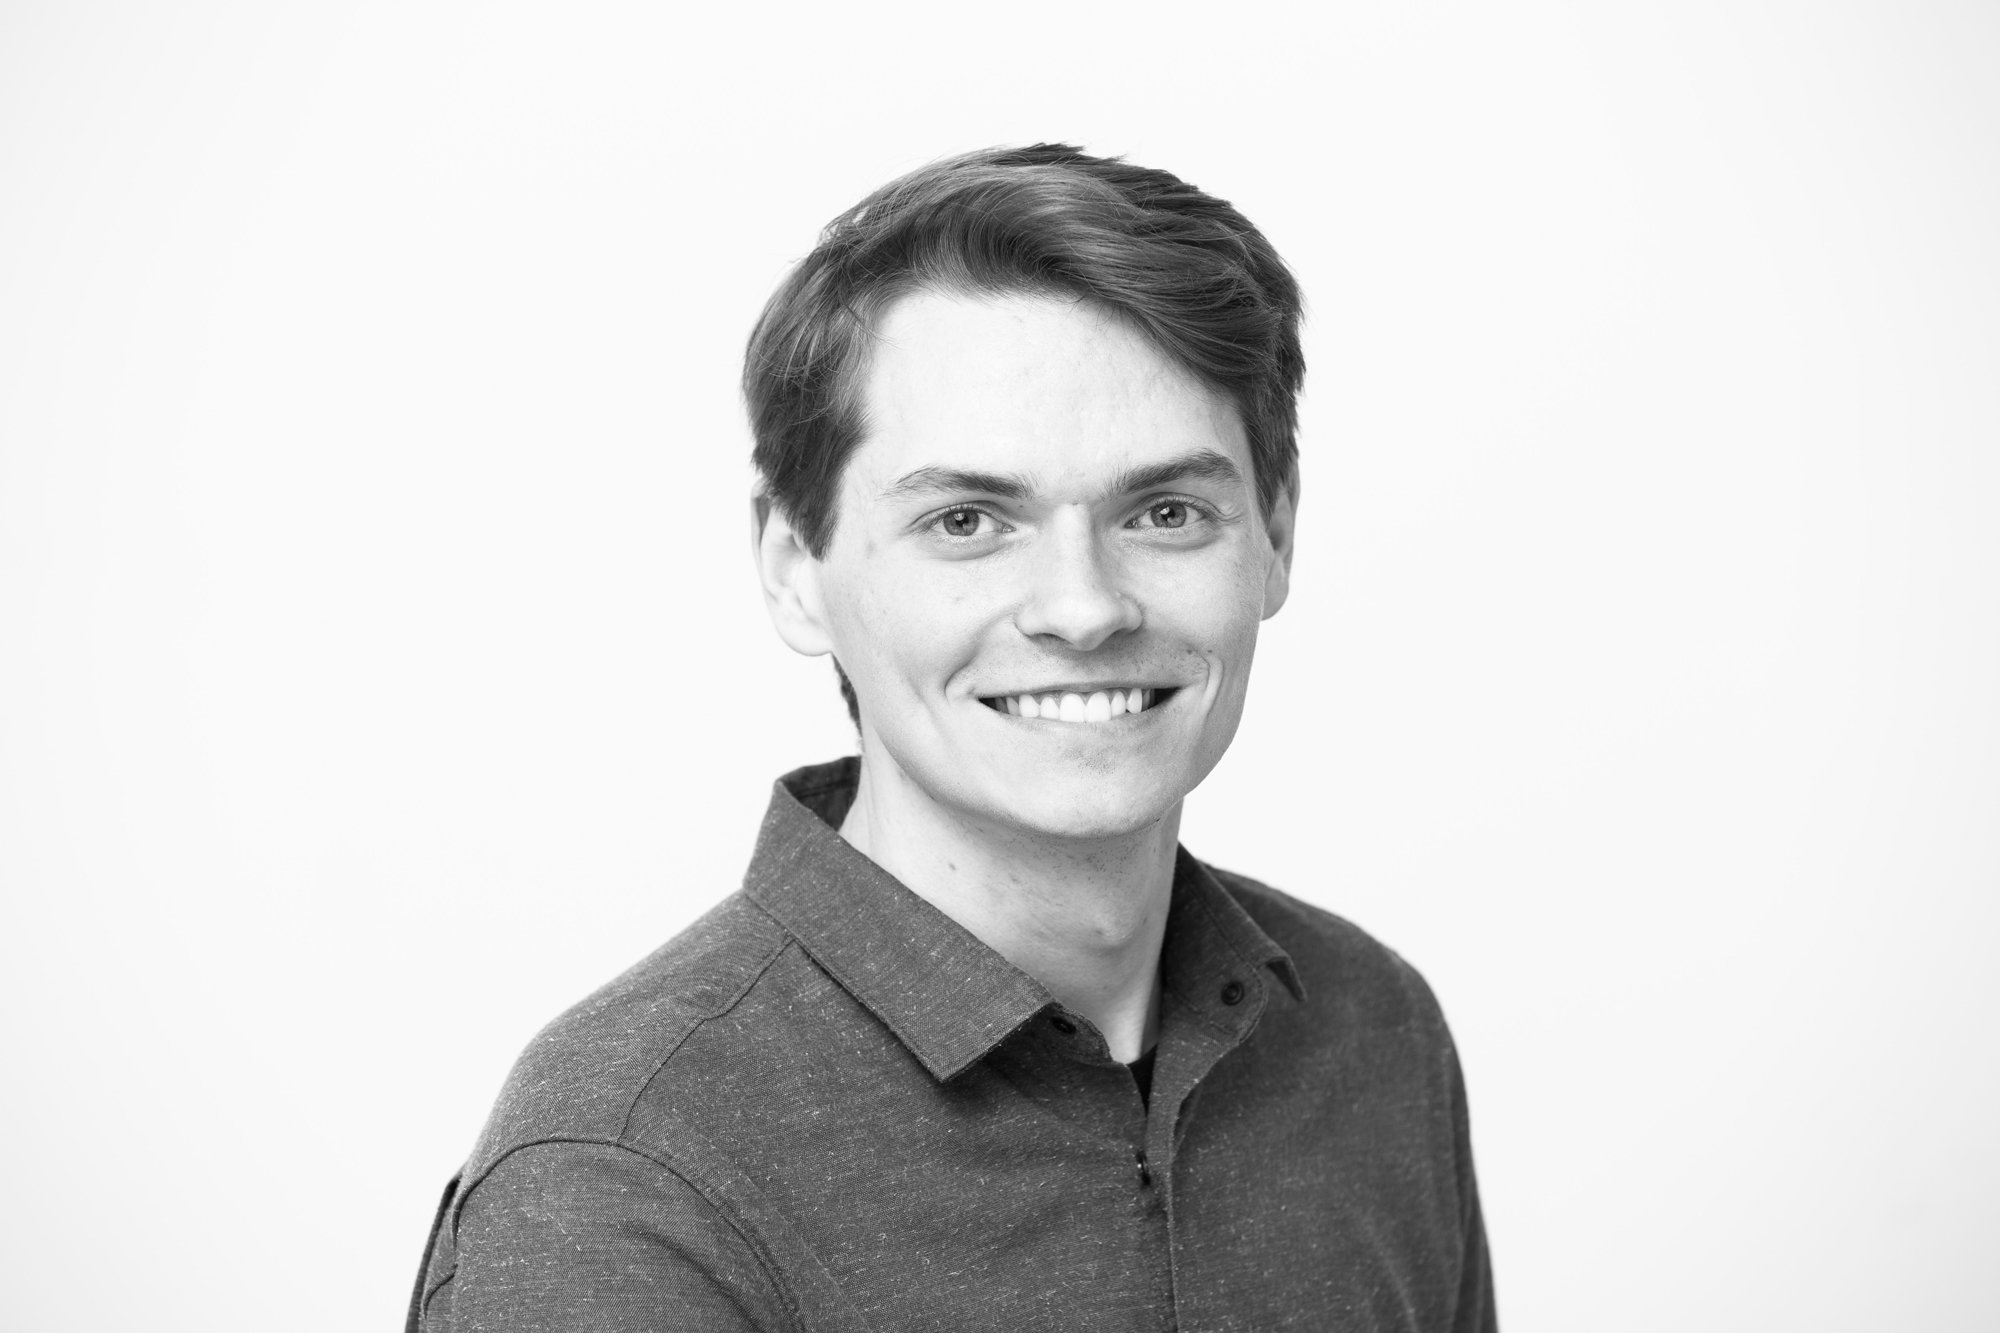 Andrew Youngstrom, Intern Architect at Neumann Monson Architects